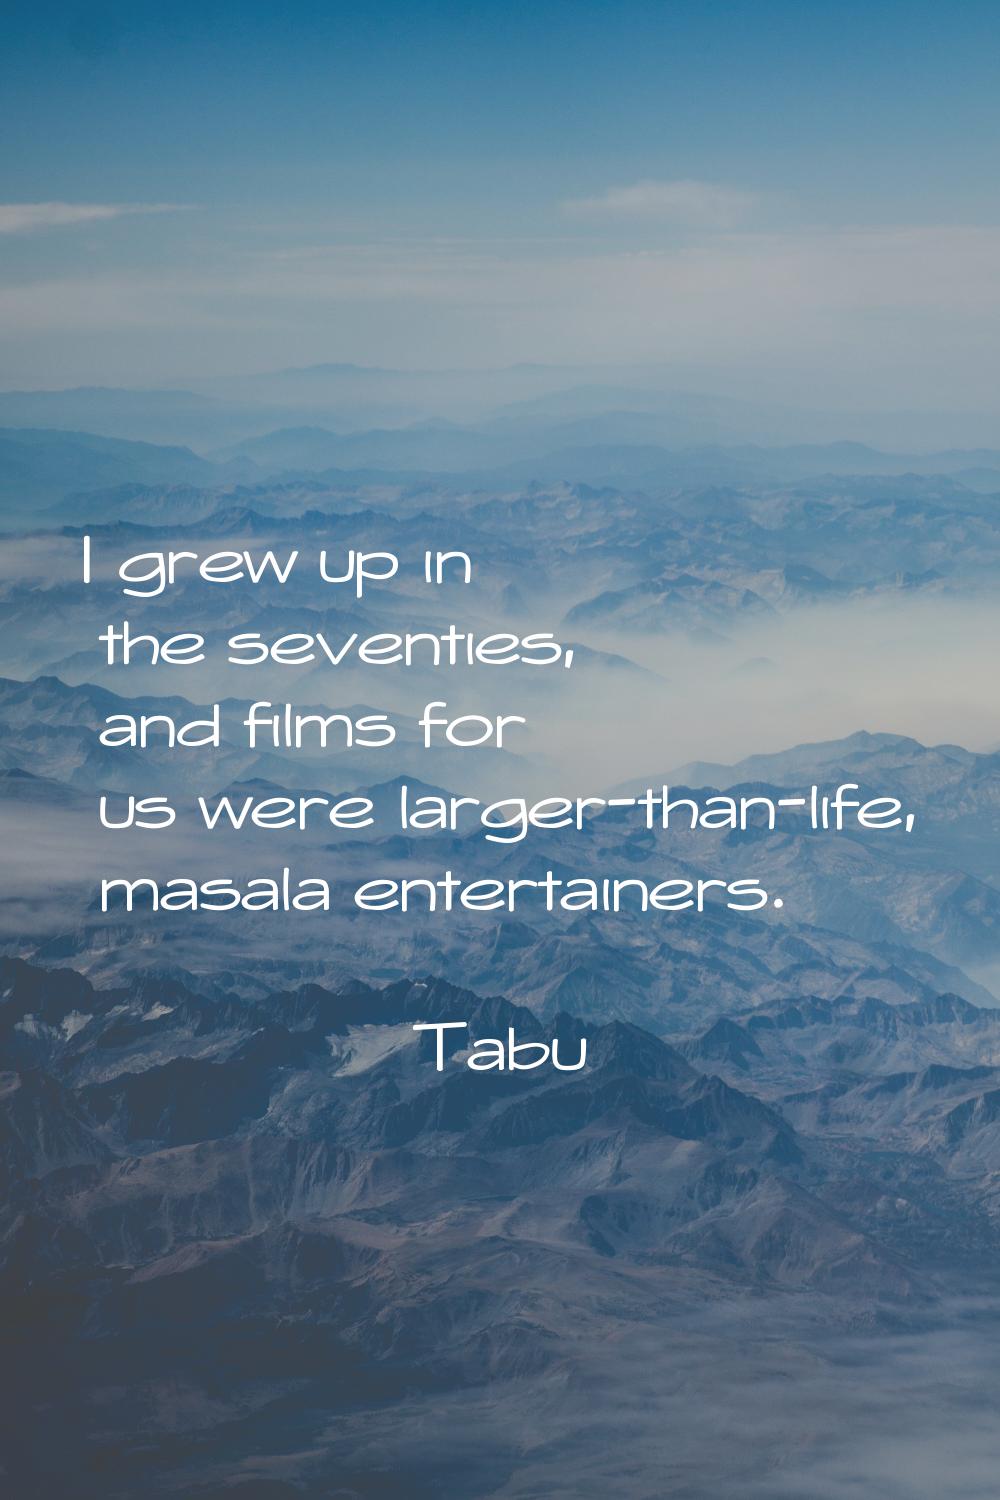 I grew up in the seventies, and films for us were larger-than-life, masala entertainers.